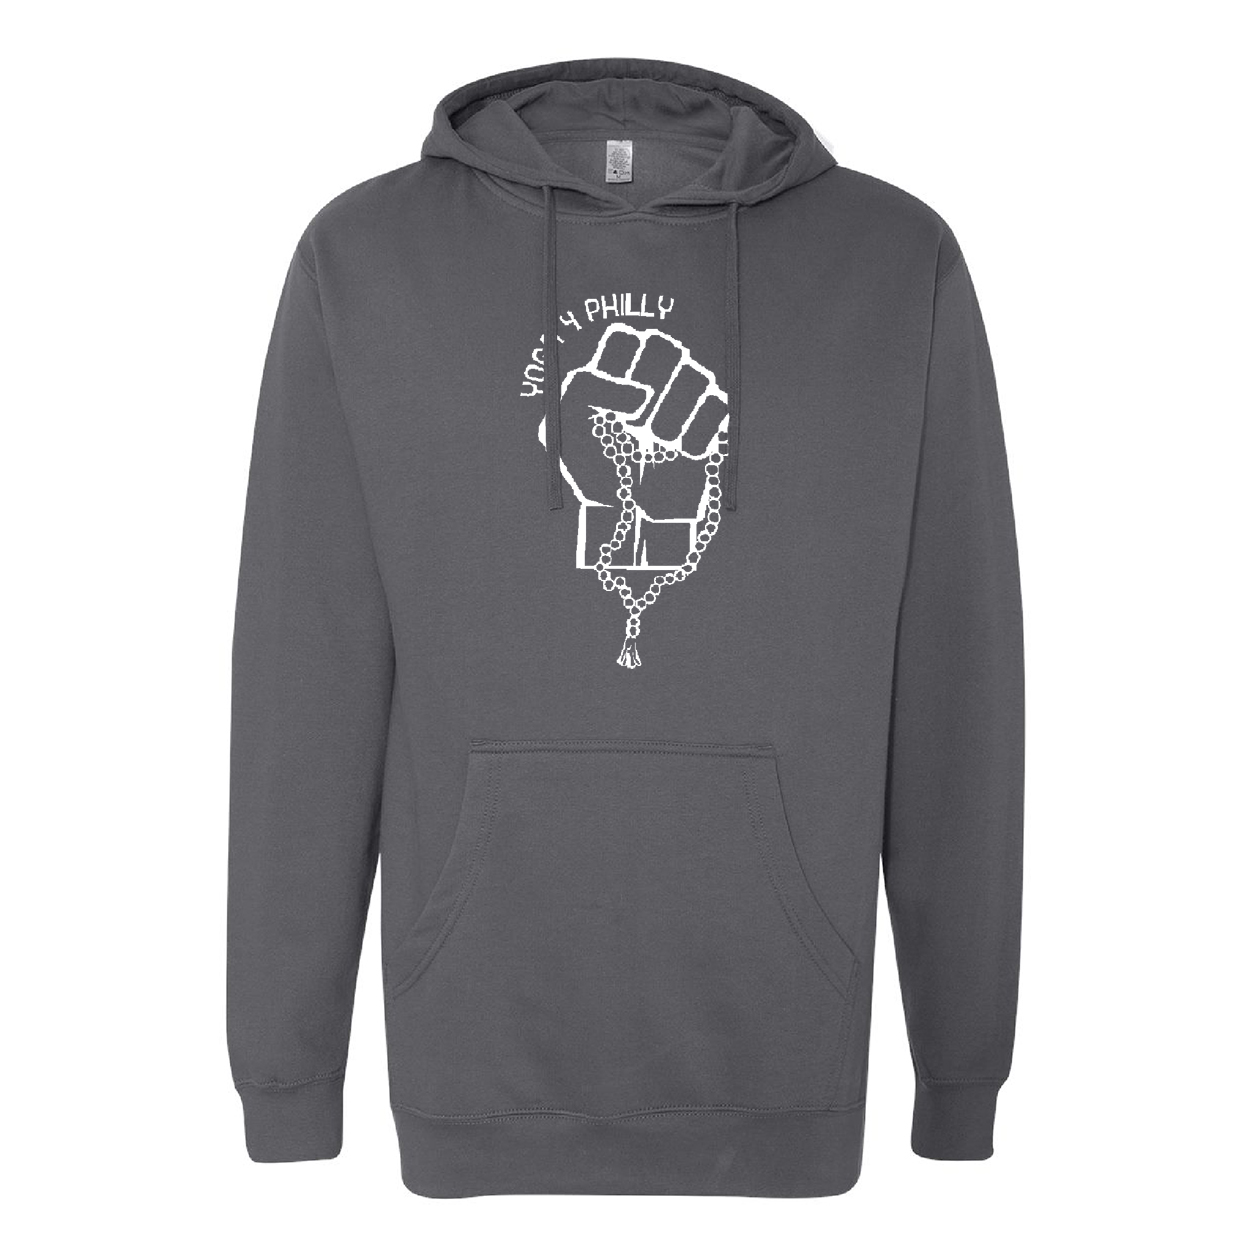 yoga 4 philly charcoal hoodie